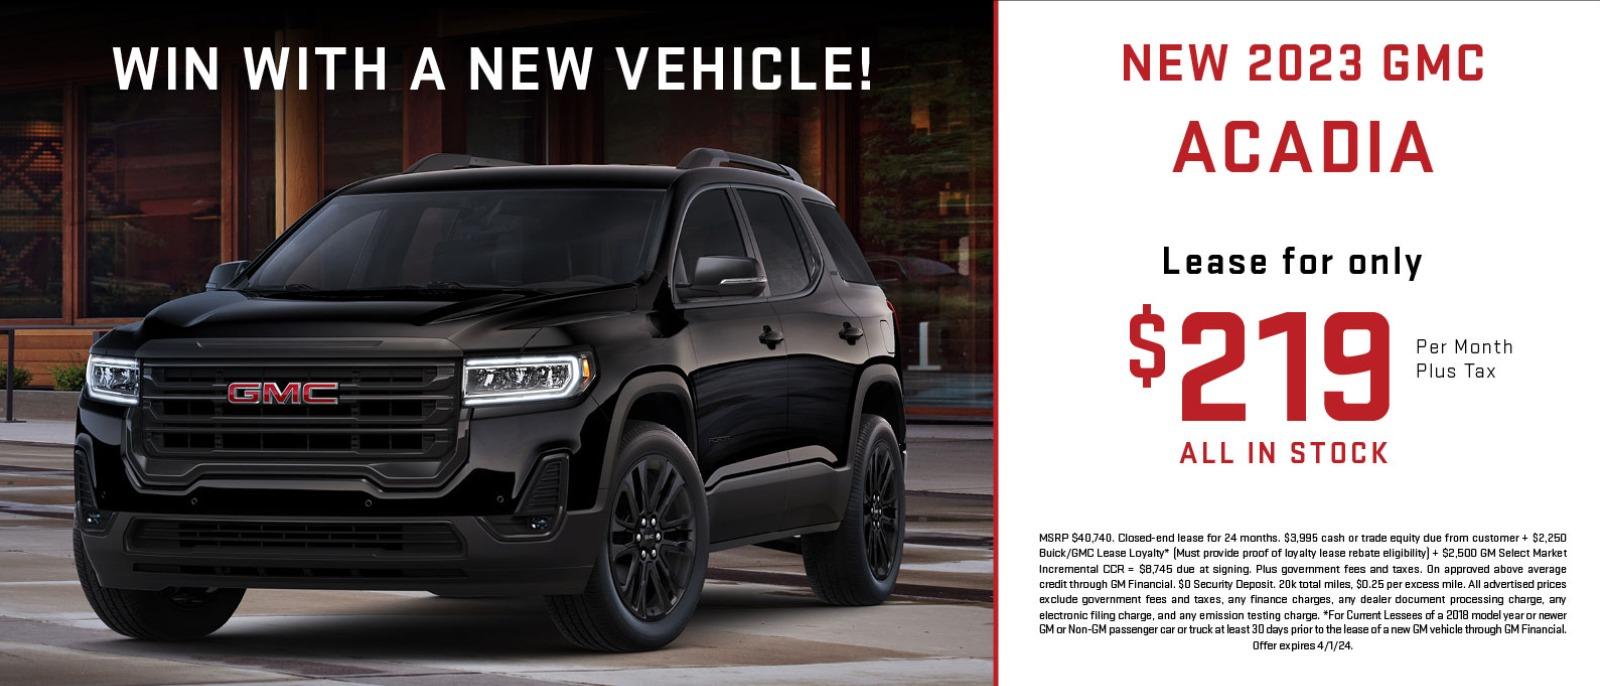 NEW 2023 GMC ACADIA Lease for only $219 ALL IN STOCK Per Month Plus Tax